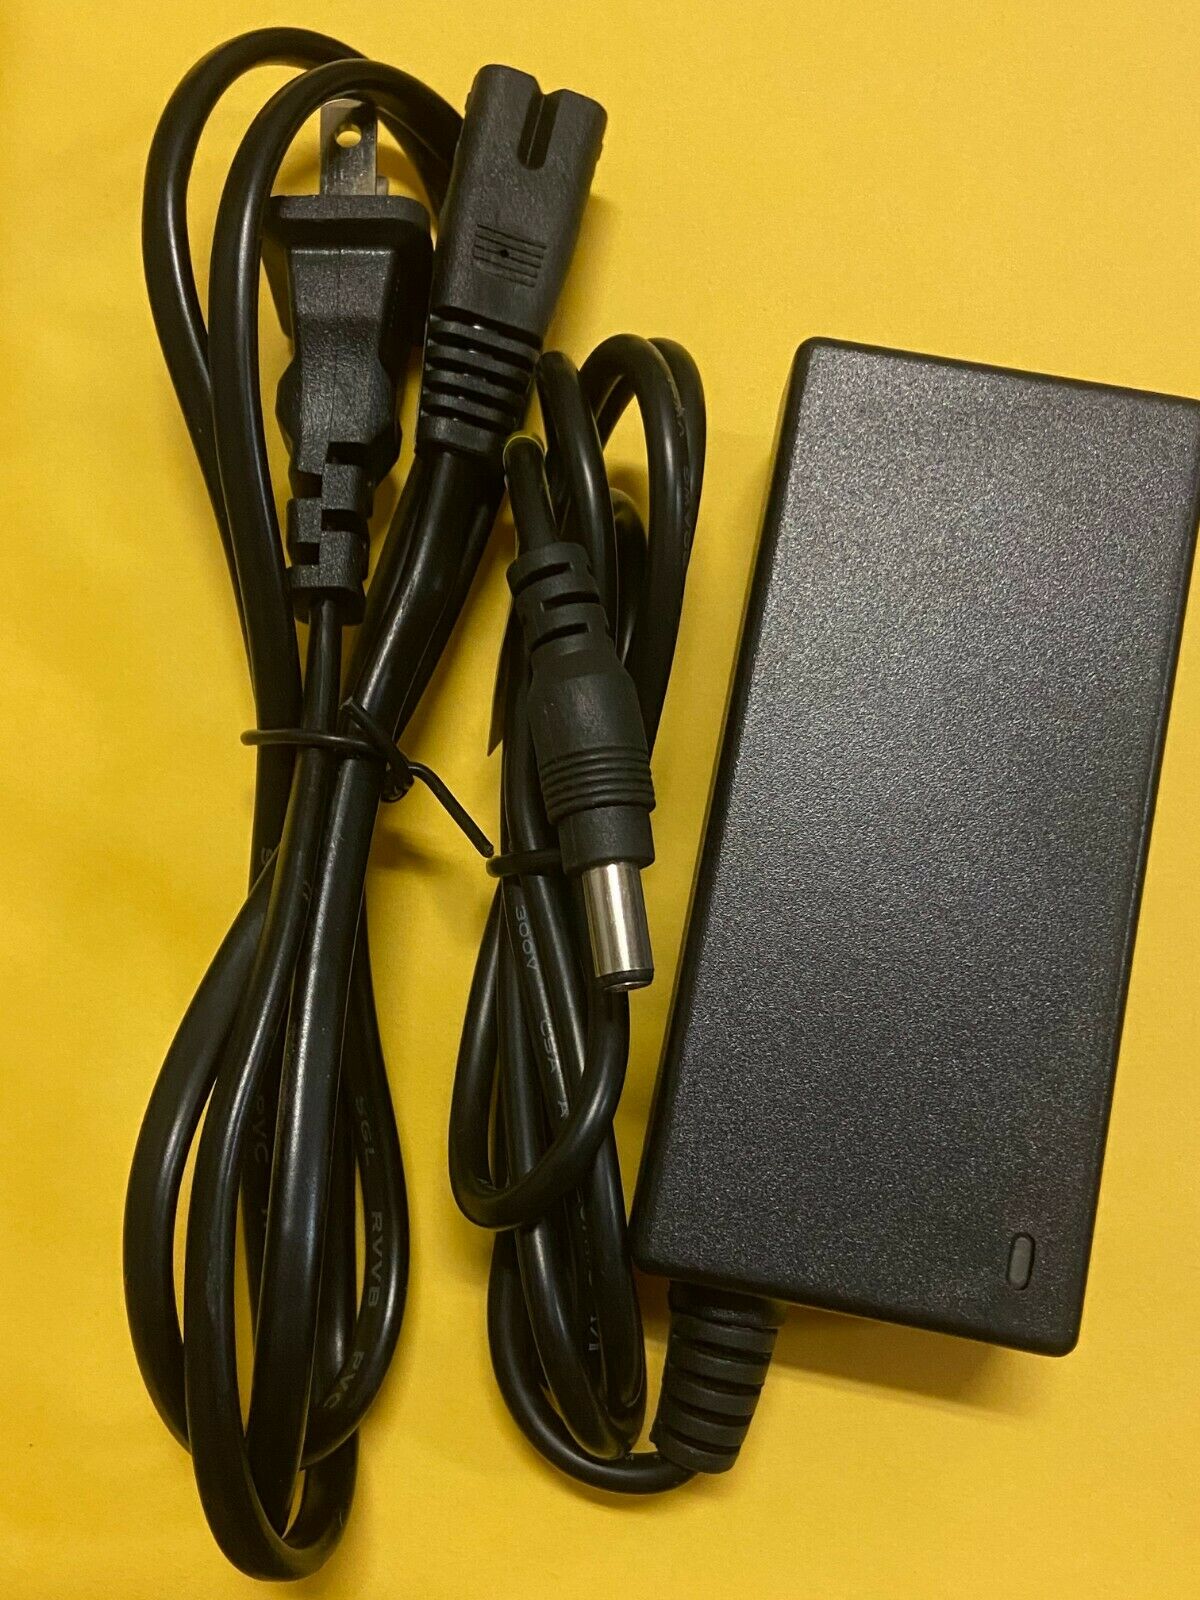 Genuine Power Supply AC DC Adapter For Qnap TS-251 /251+ / TS-25X / TS-253 Pro Color: Black Type: